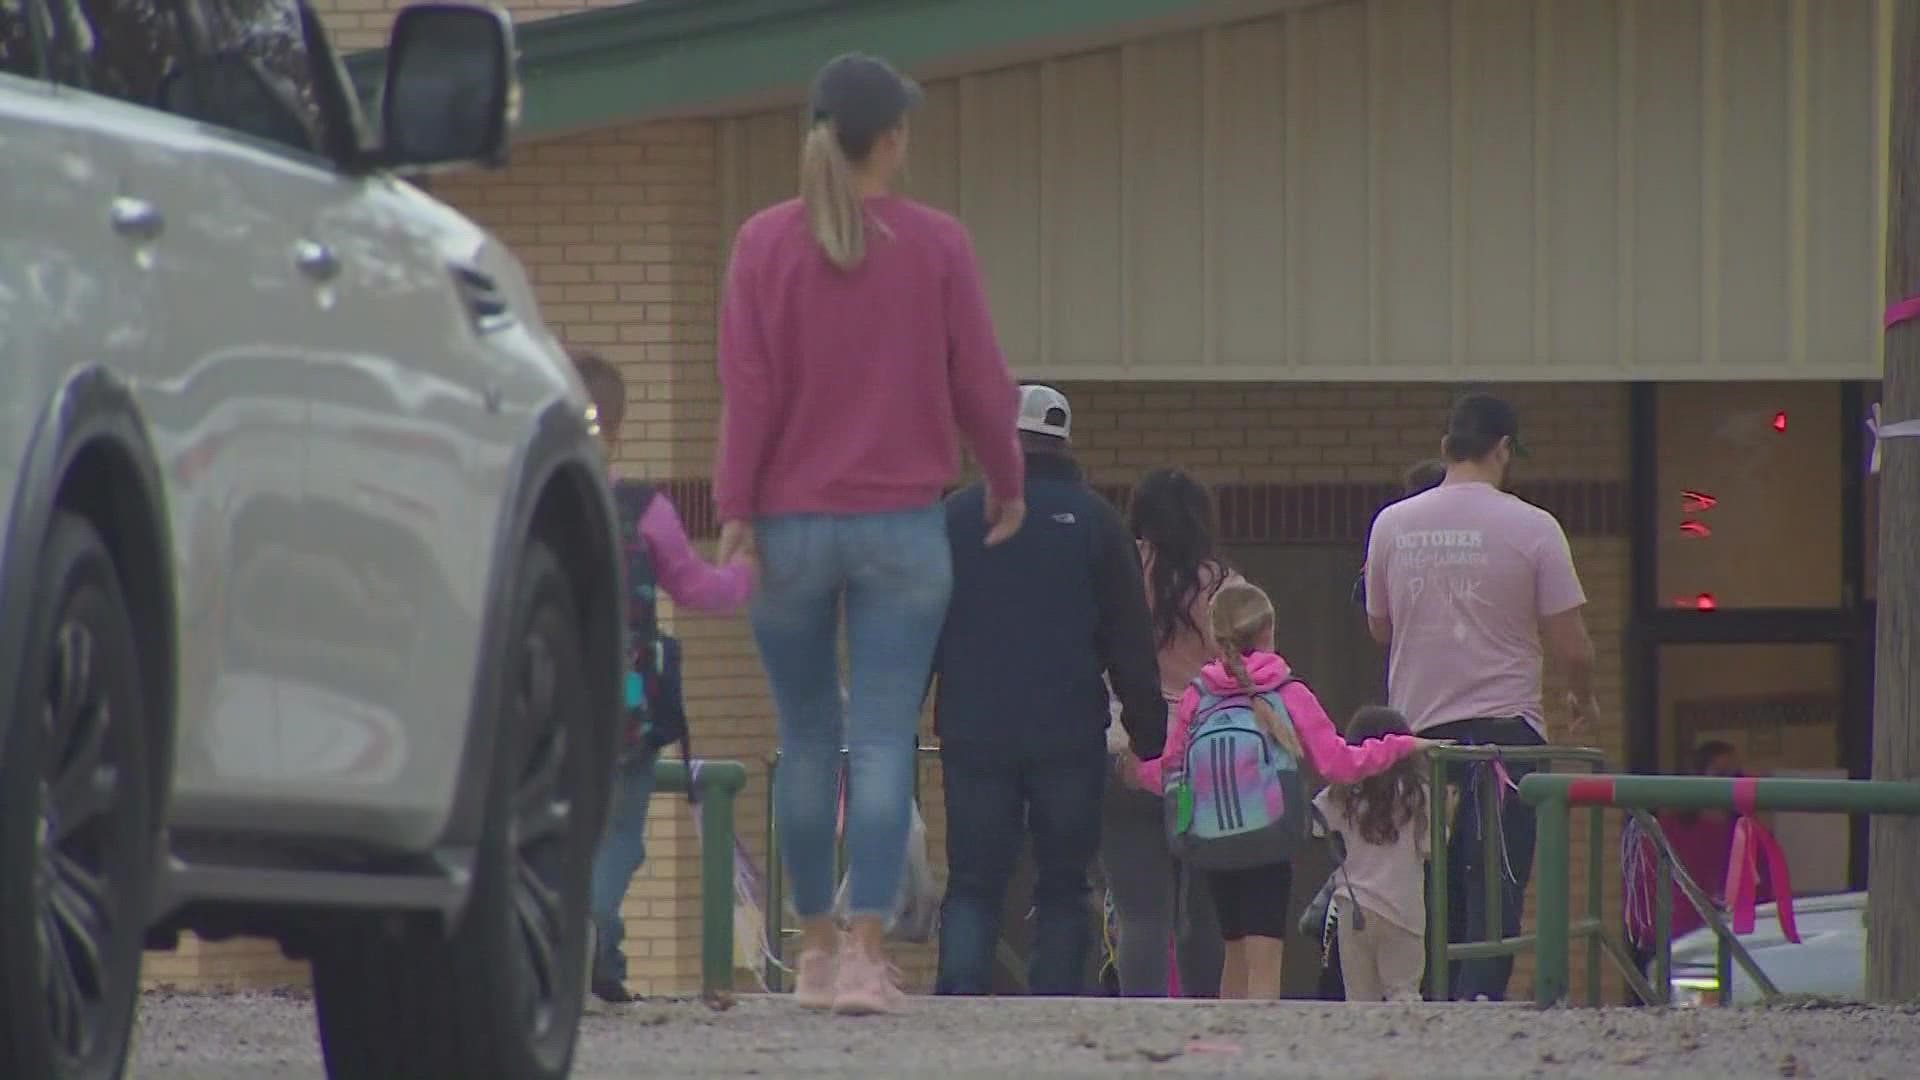 School districts throughout Texas were asked to wear pink in honor of 7-year-old Athena Strand, whose body was found following an AMBER Alert in Wise County.